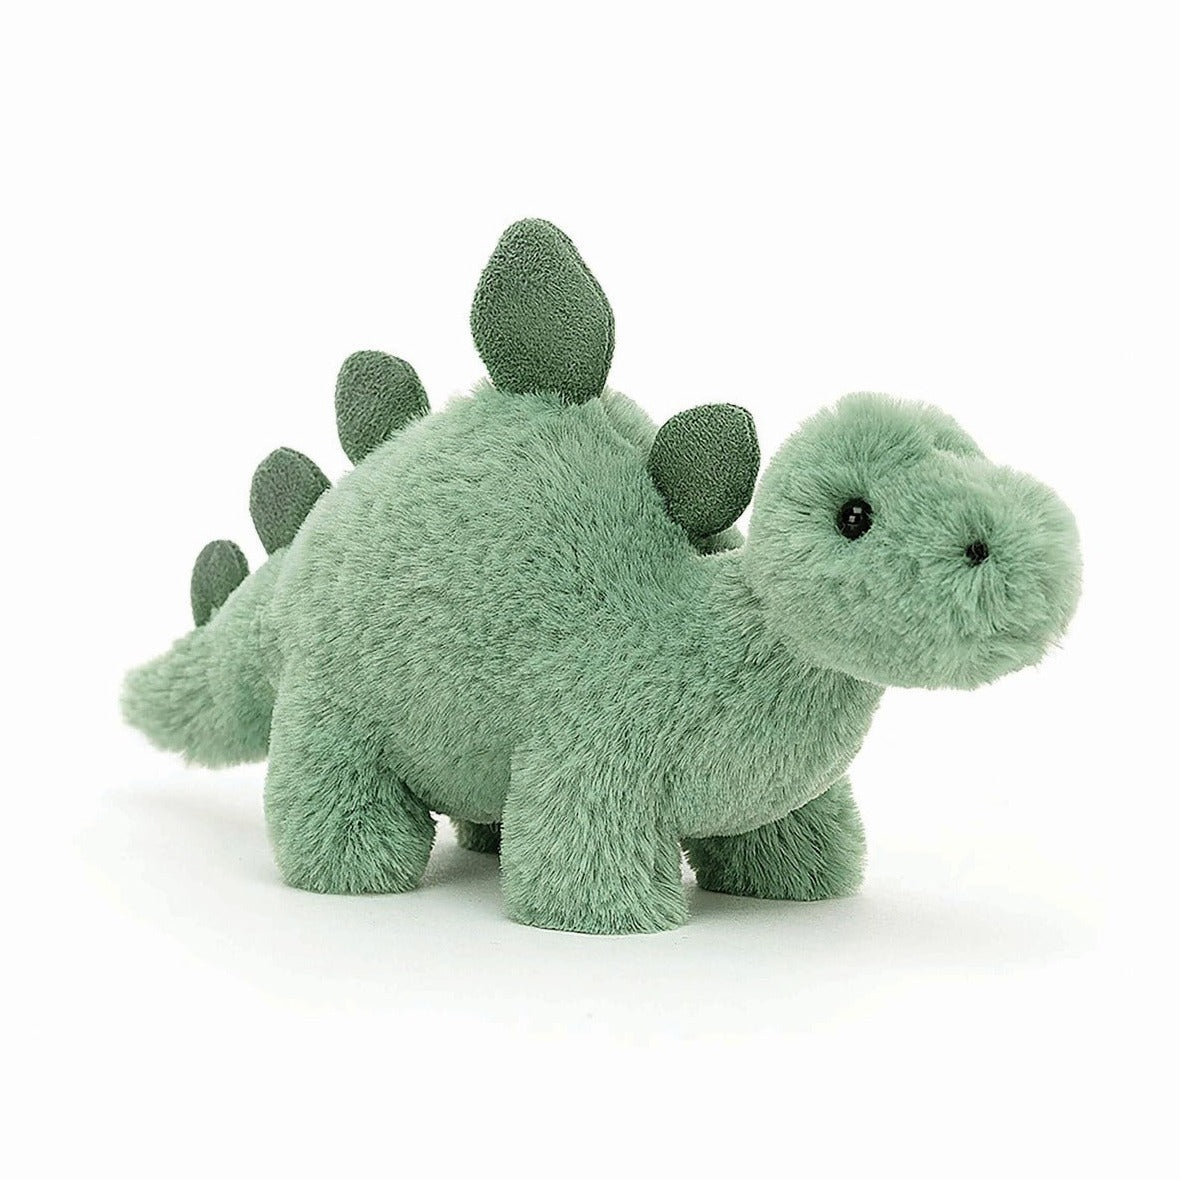 jellycat dinosaur - angus and dudley